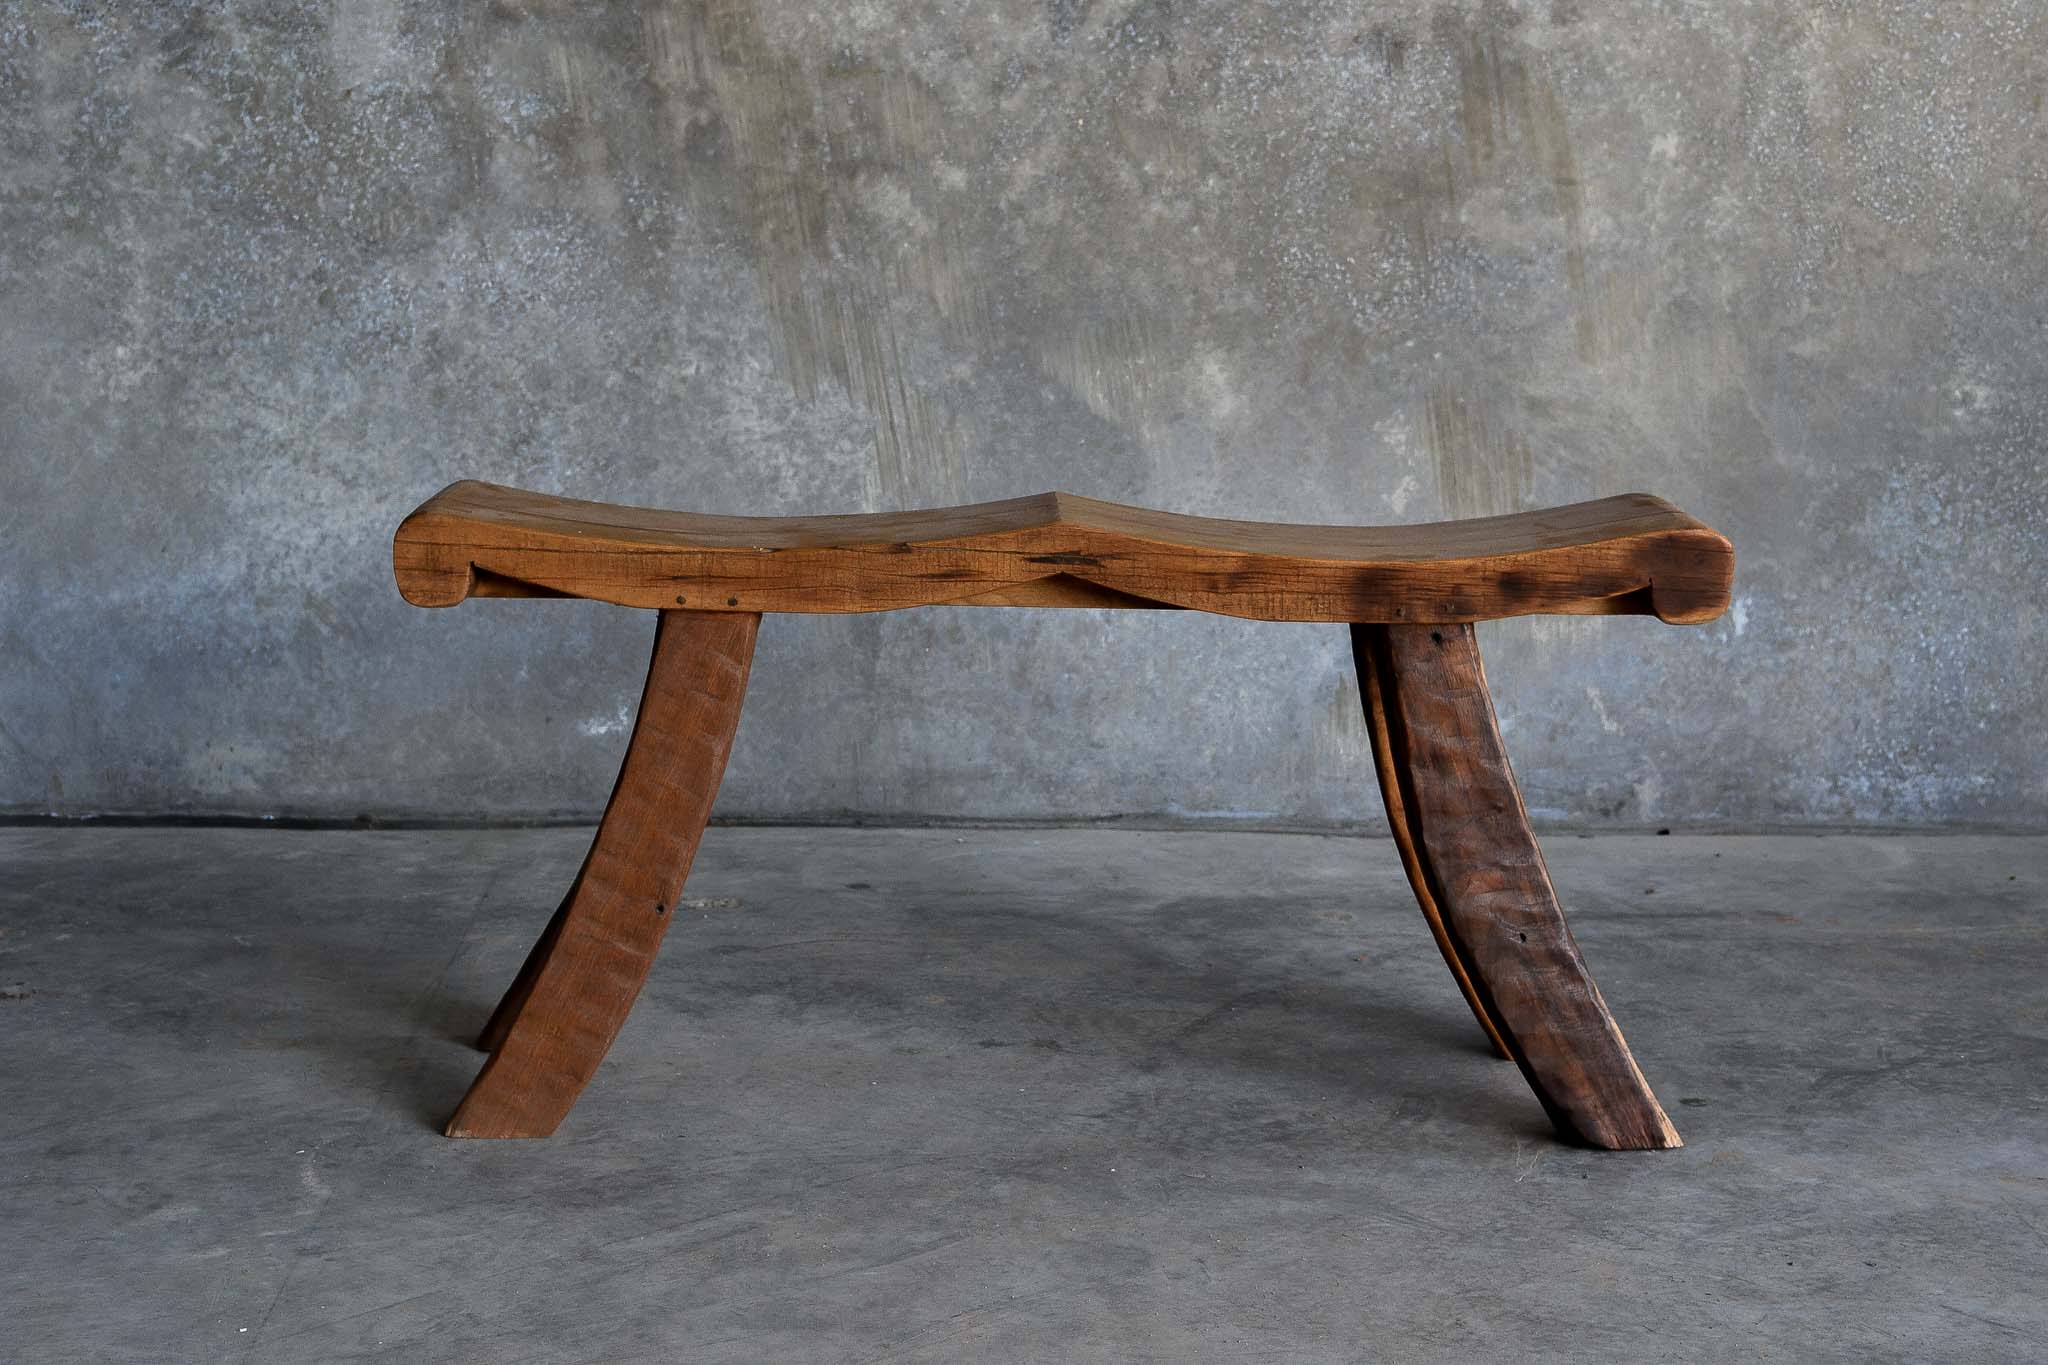 Antique Javanese wave Bench - two